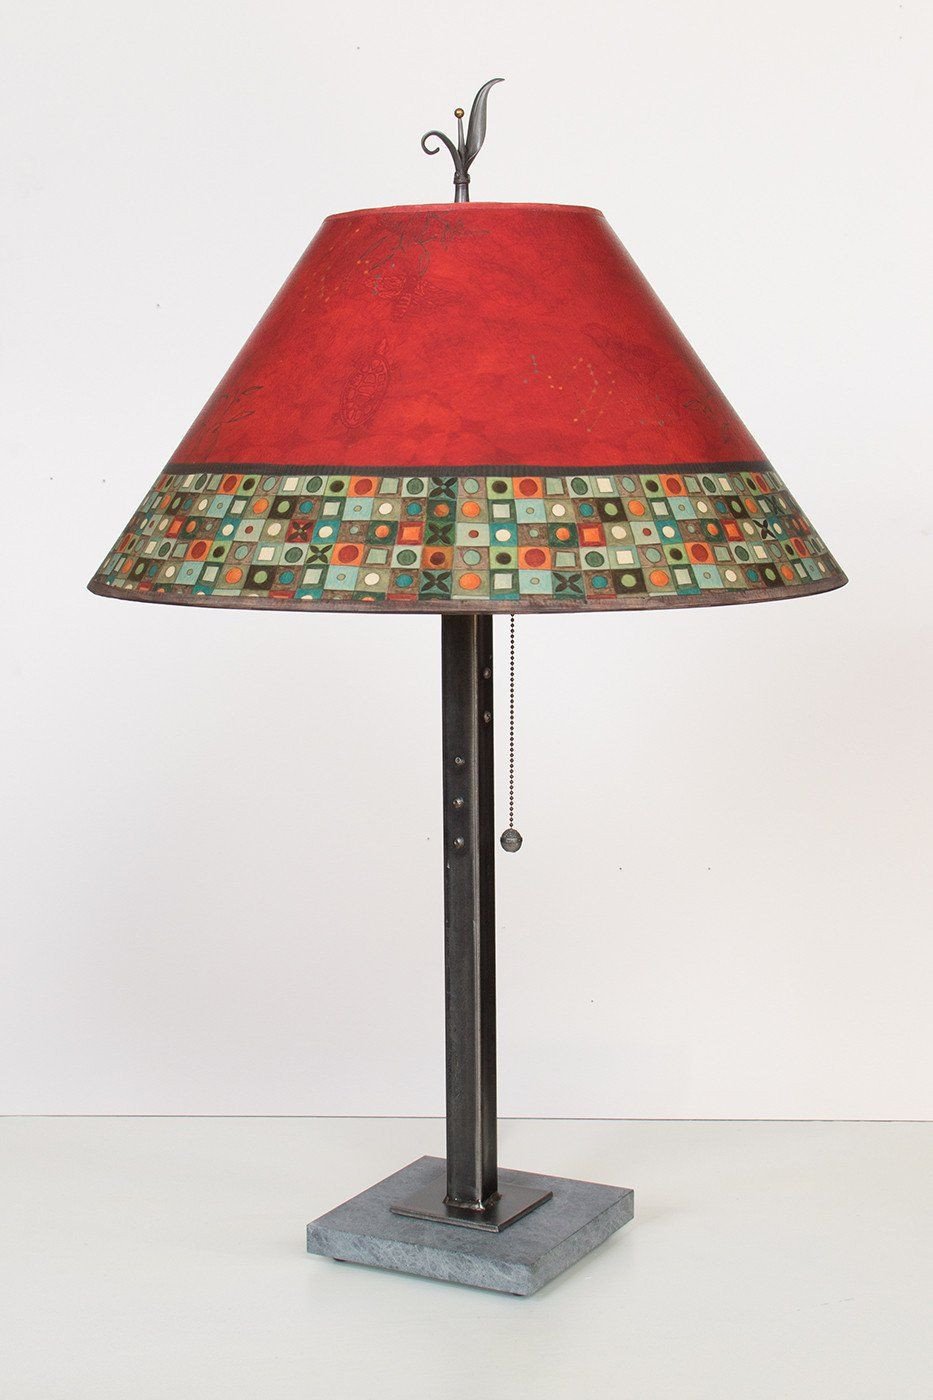 Steel Table Lamp on Italian Marble with Large Conical Shade in Red Mosaic